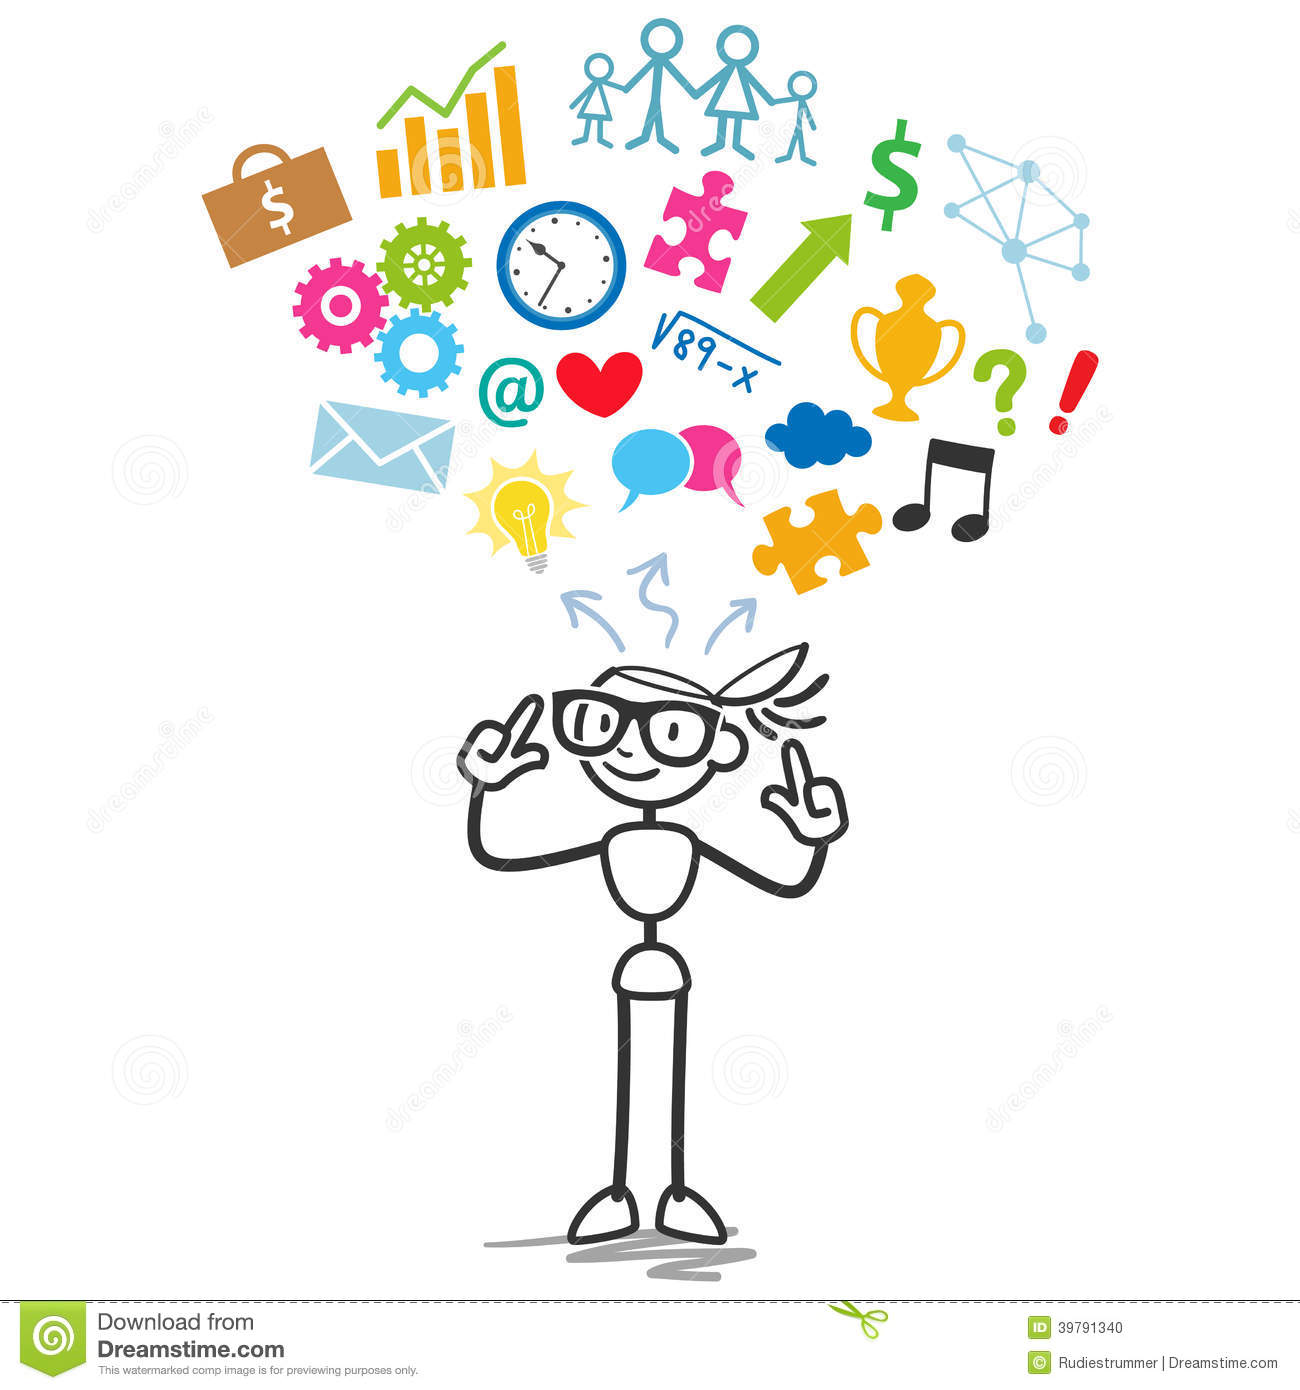 Stick Figure Dreams Thoughts Thinking Creativity Stock Vector   Image    